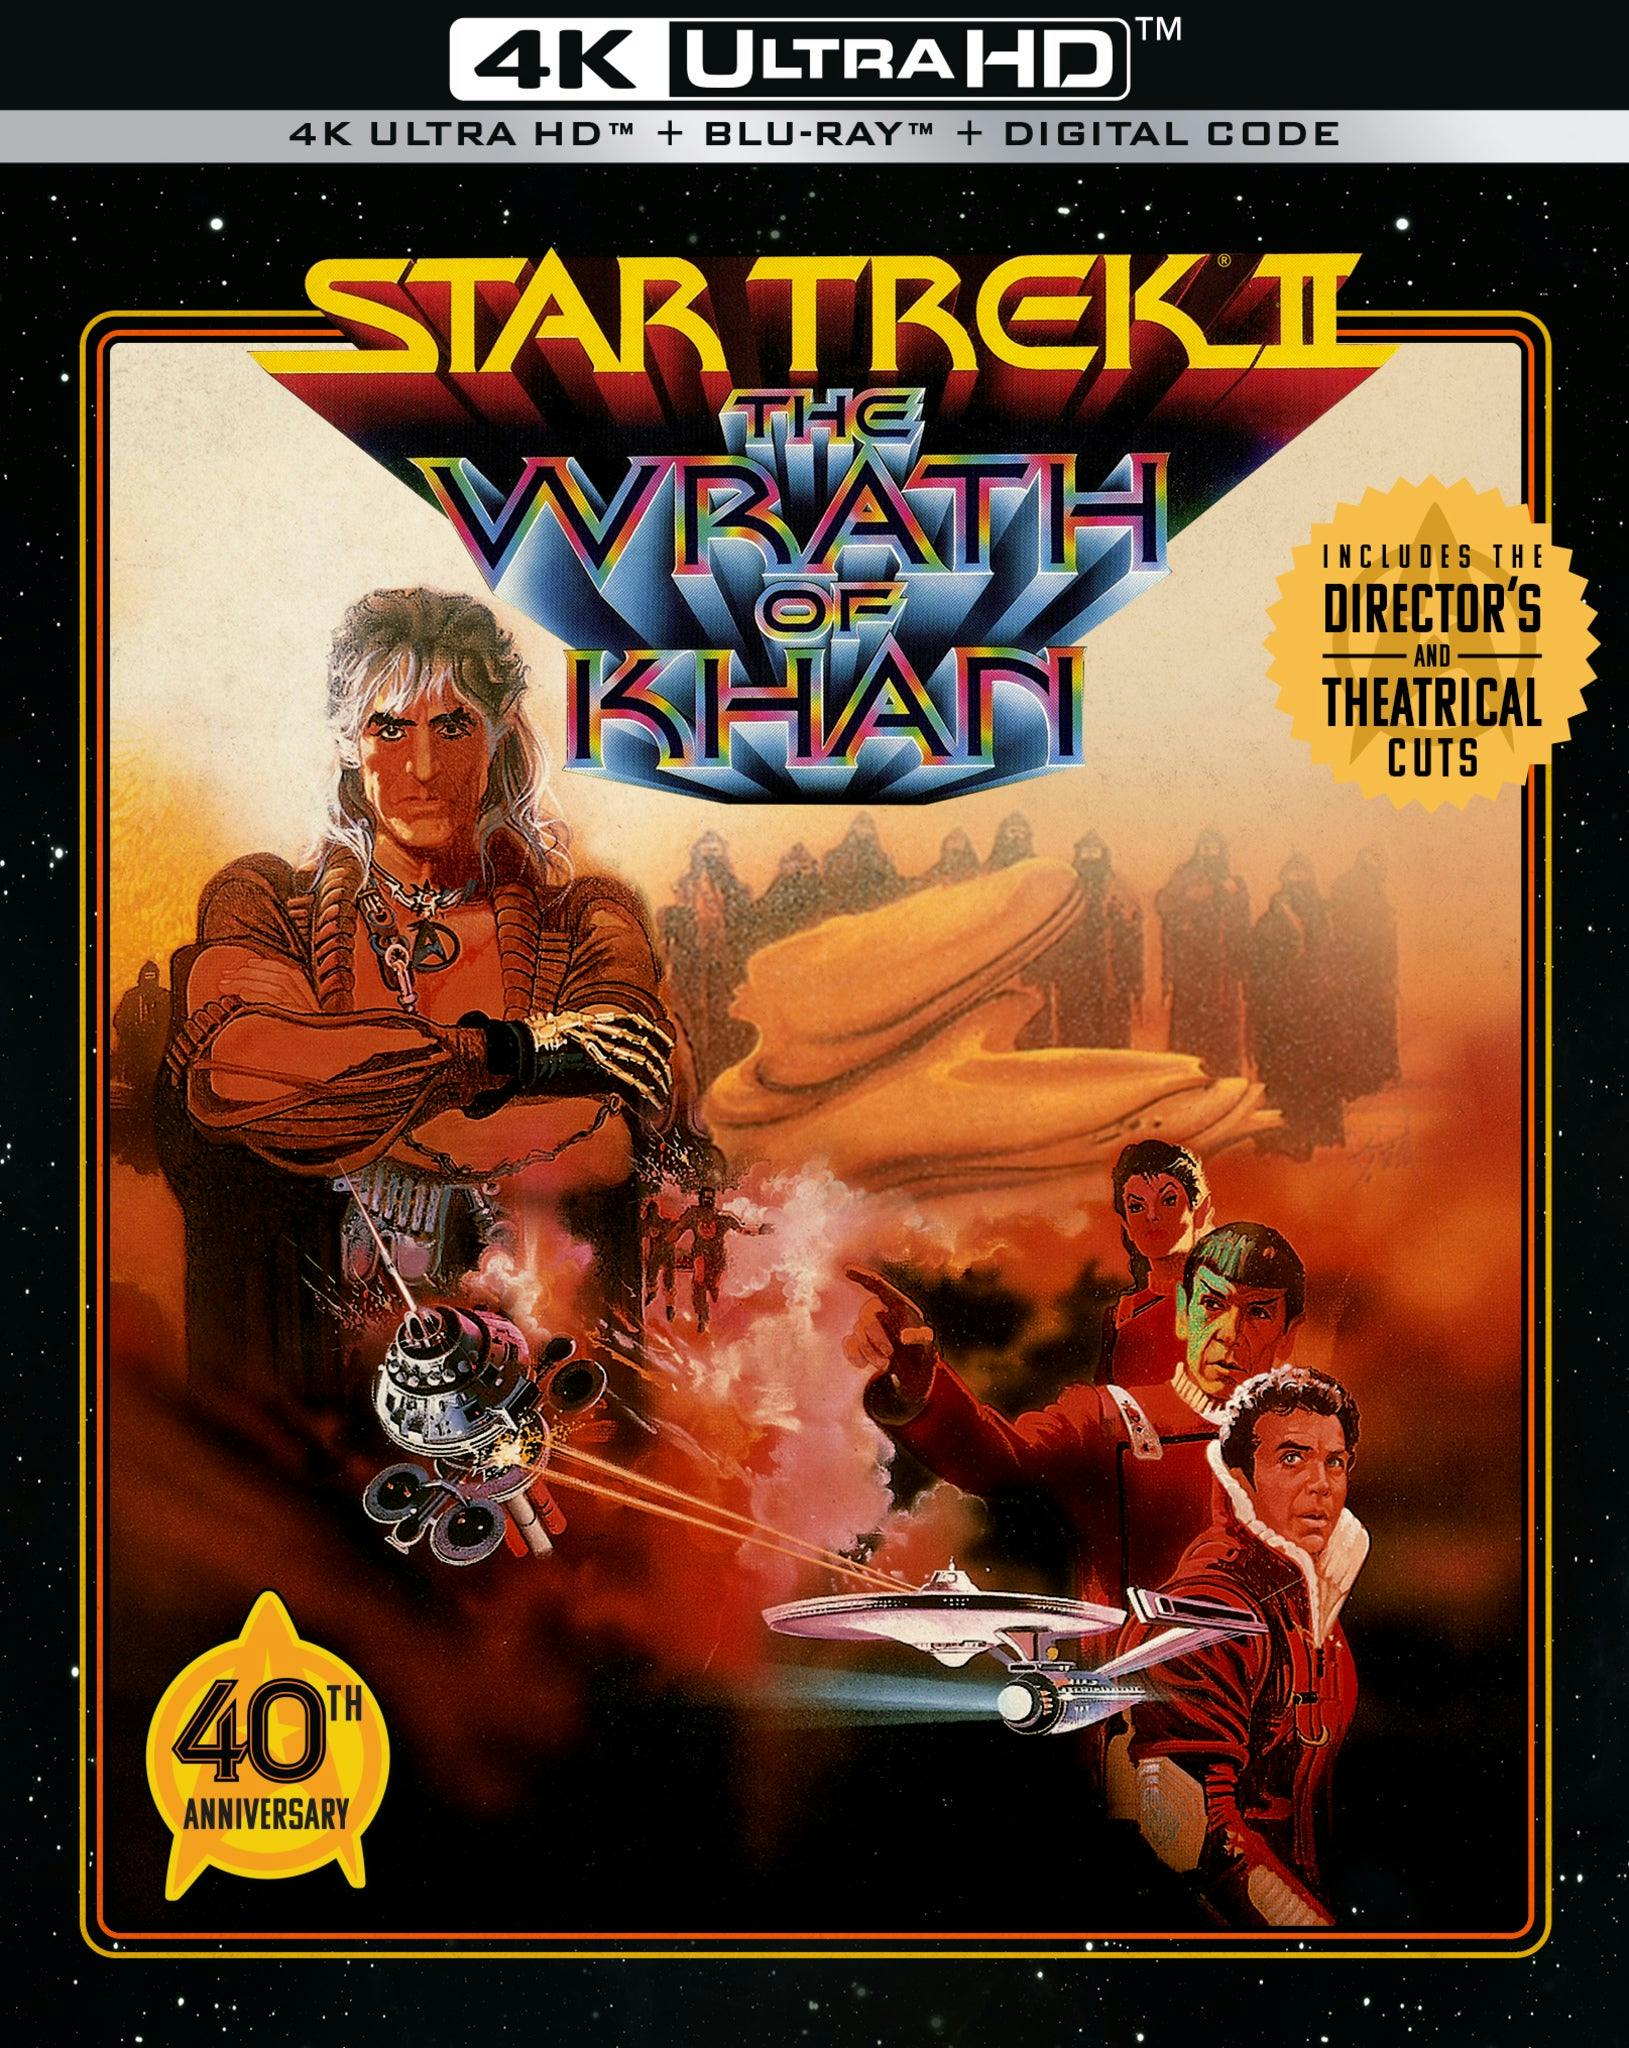 The cover for the 4K Ultra HD edition of Star Trek II: The Wrath of Khan.